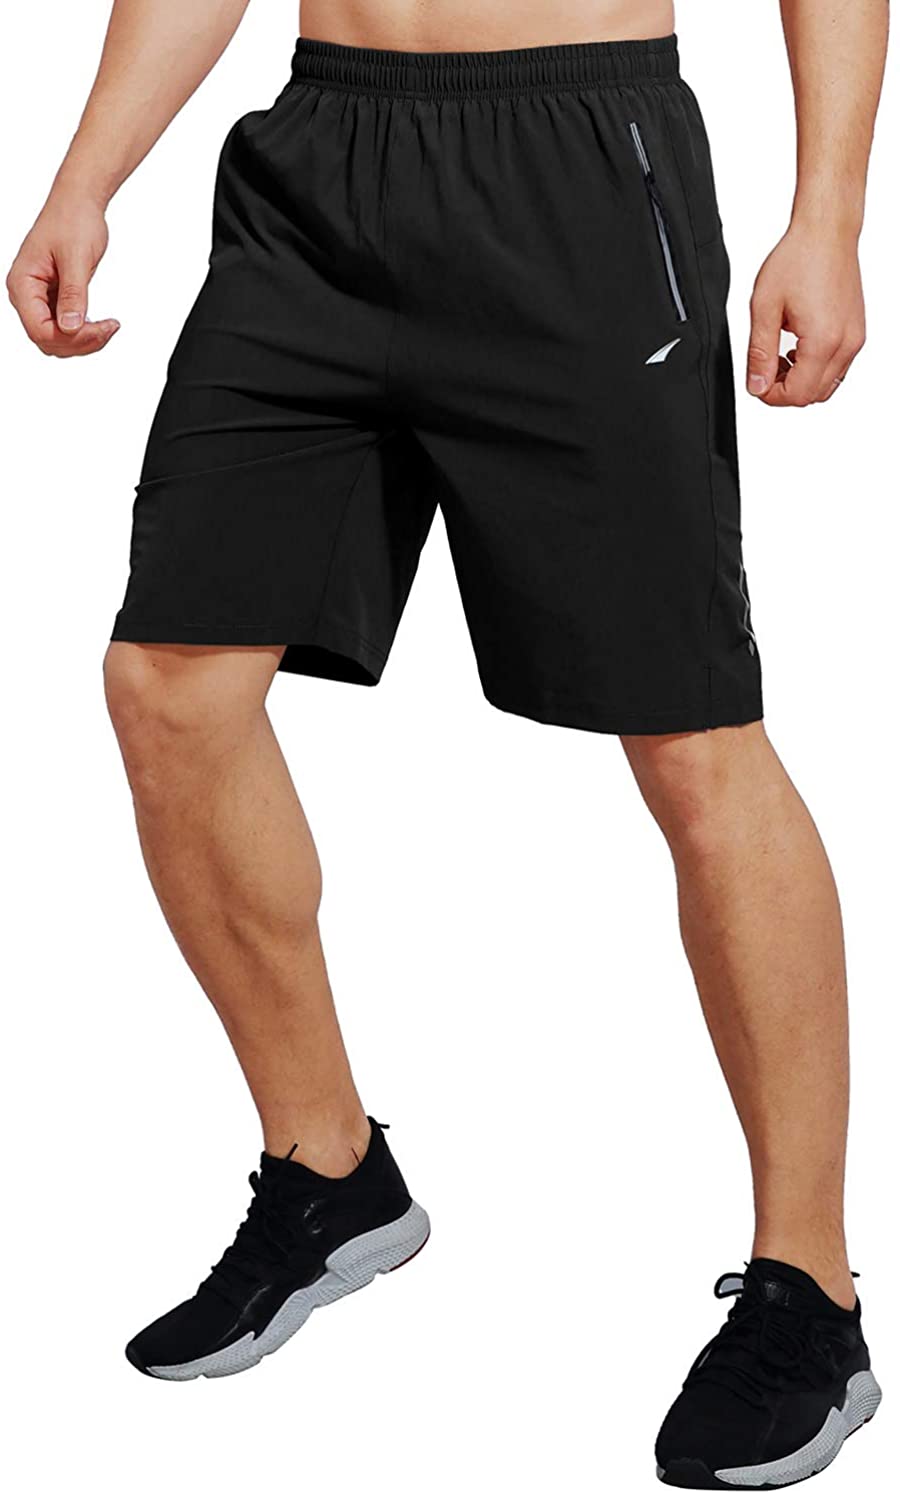 VAYAGER Mens Athletic Shorts 9 Inch Running Workout Short Quick Dry ...